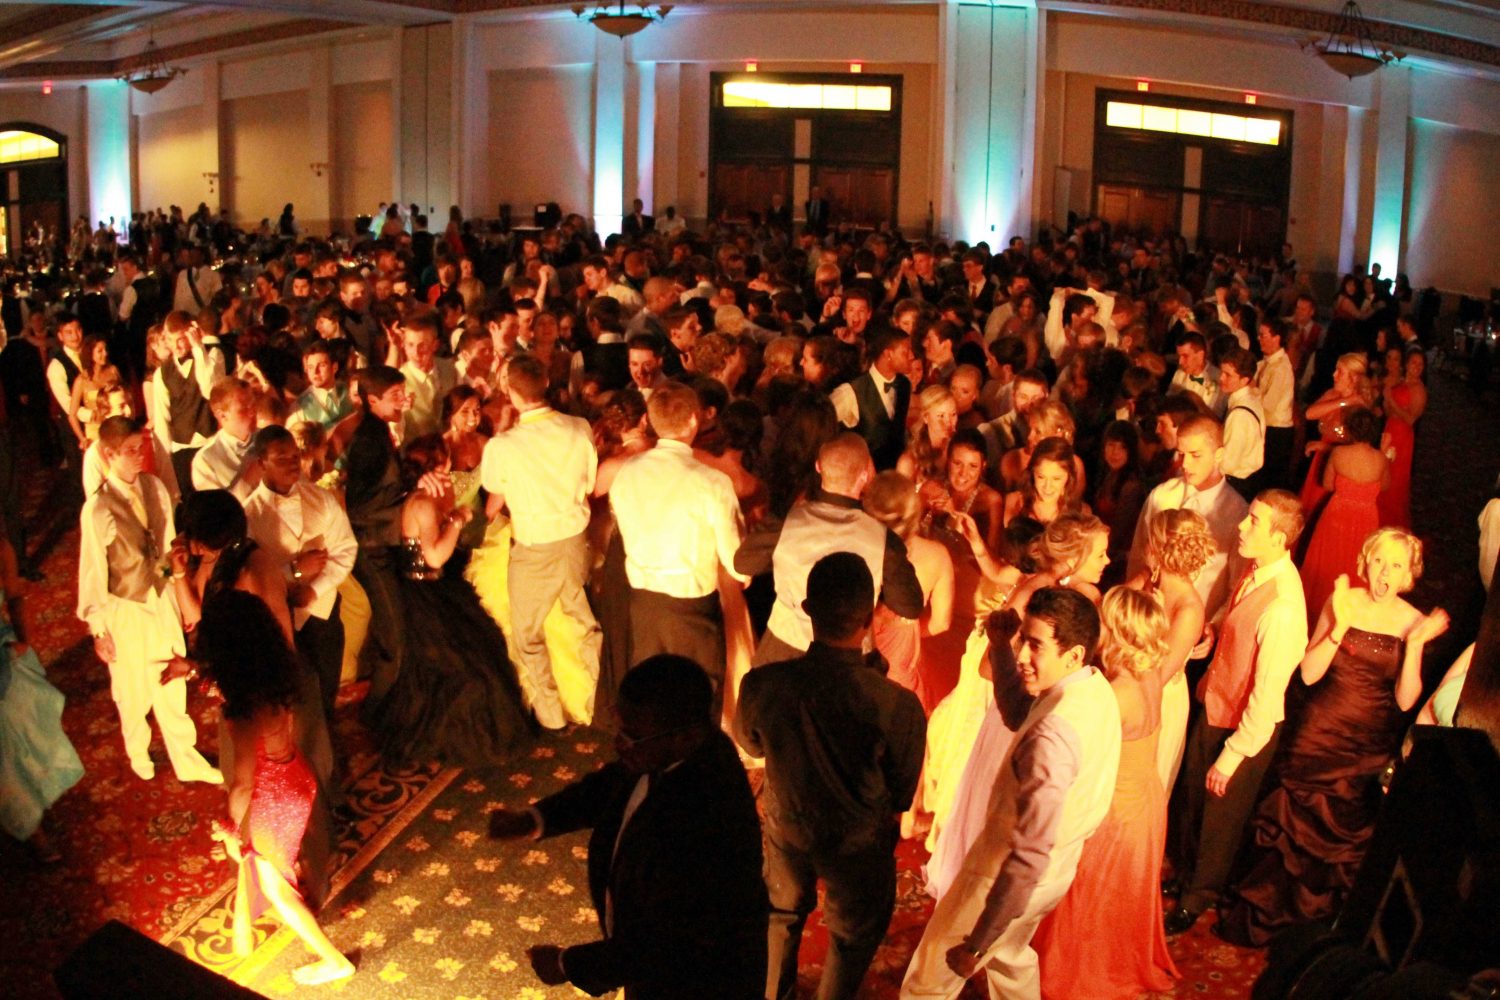 Students dance together at prom, themed A night in Vegas.